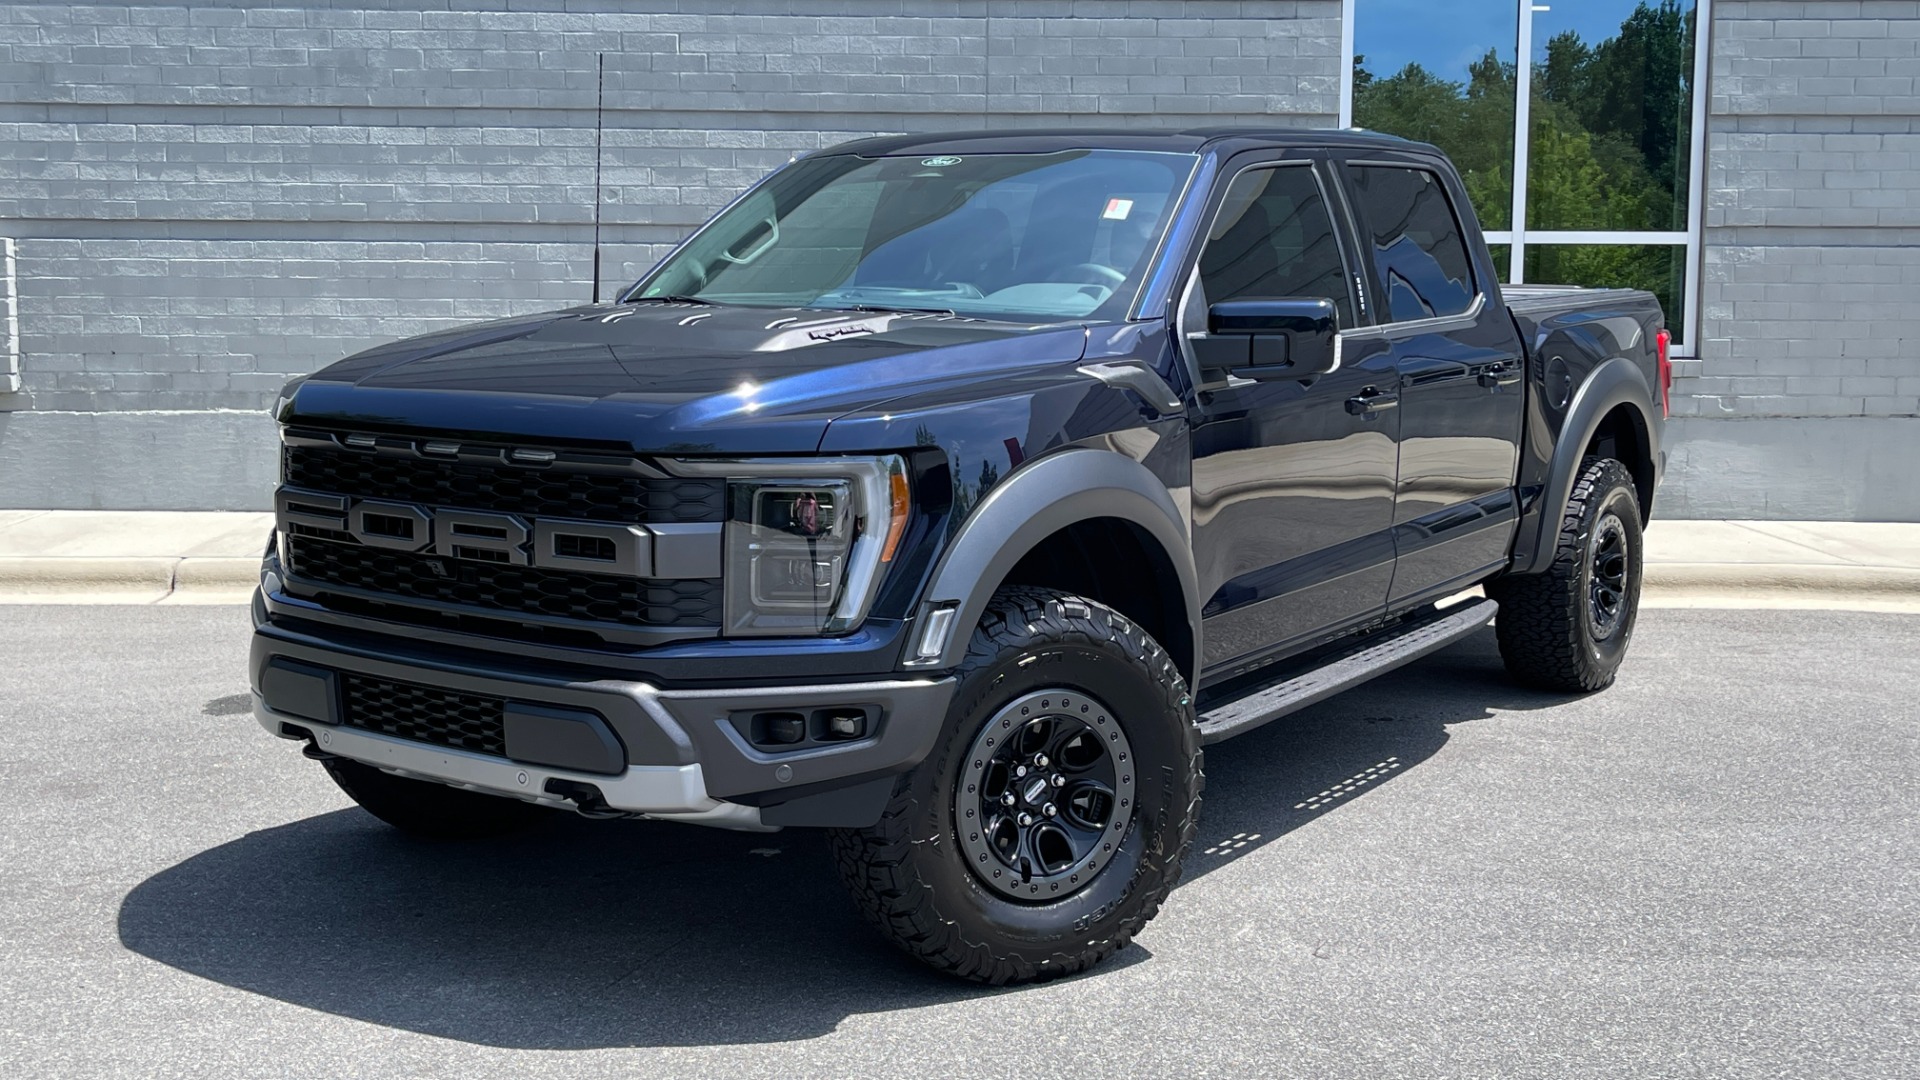 Used 2022 Ford F-150 RAPTOR / FOX SHOCKS / CONSOLE SAFE / 802A PACK for sale $98,495 at Formula Imports in Charlotte NC 28227 1